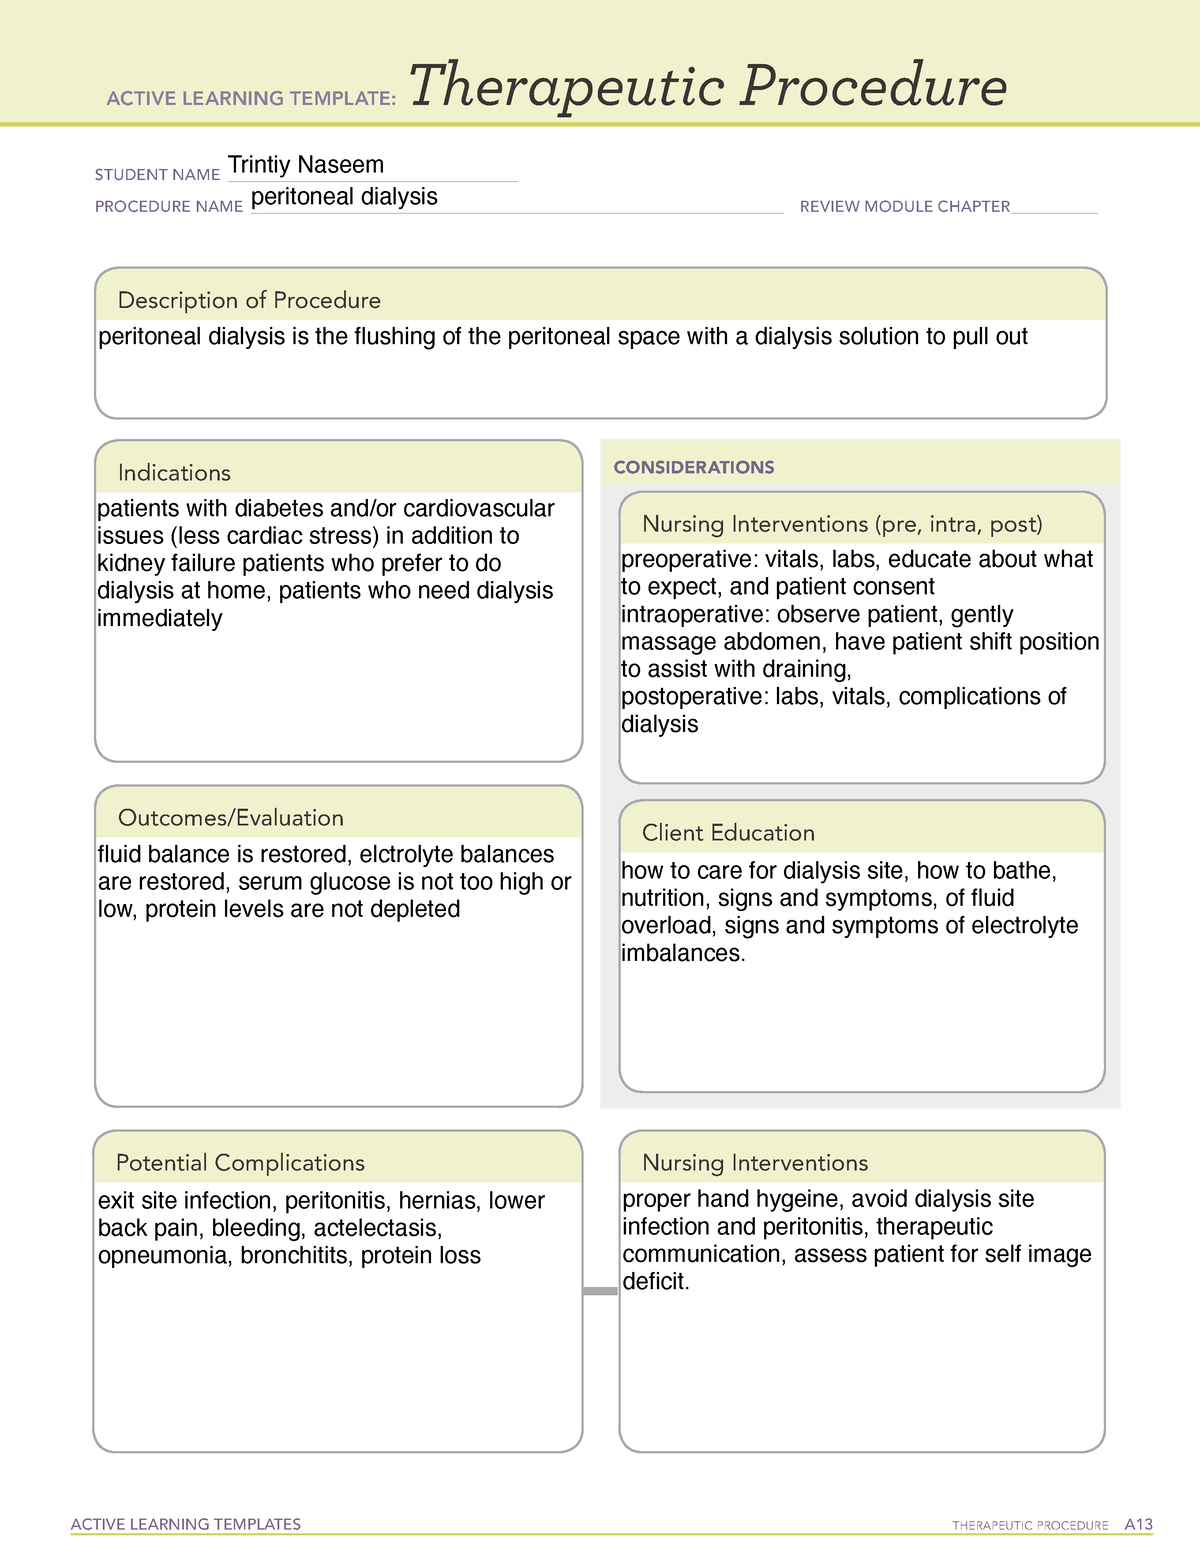 Peritoneal dialysis therapeutic procedure ACTIVE LEARNING TEMPLATES